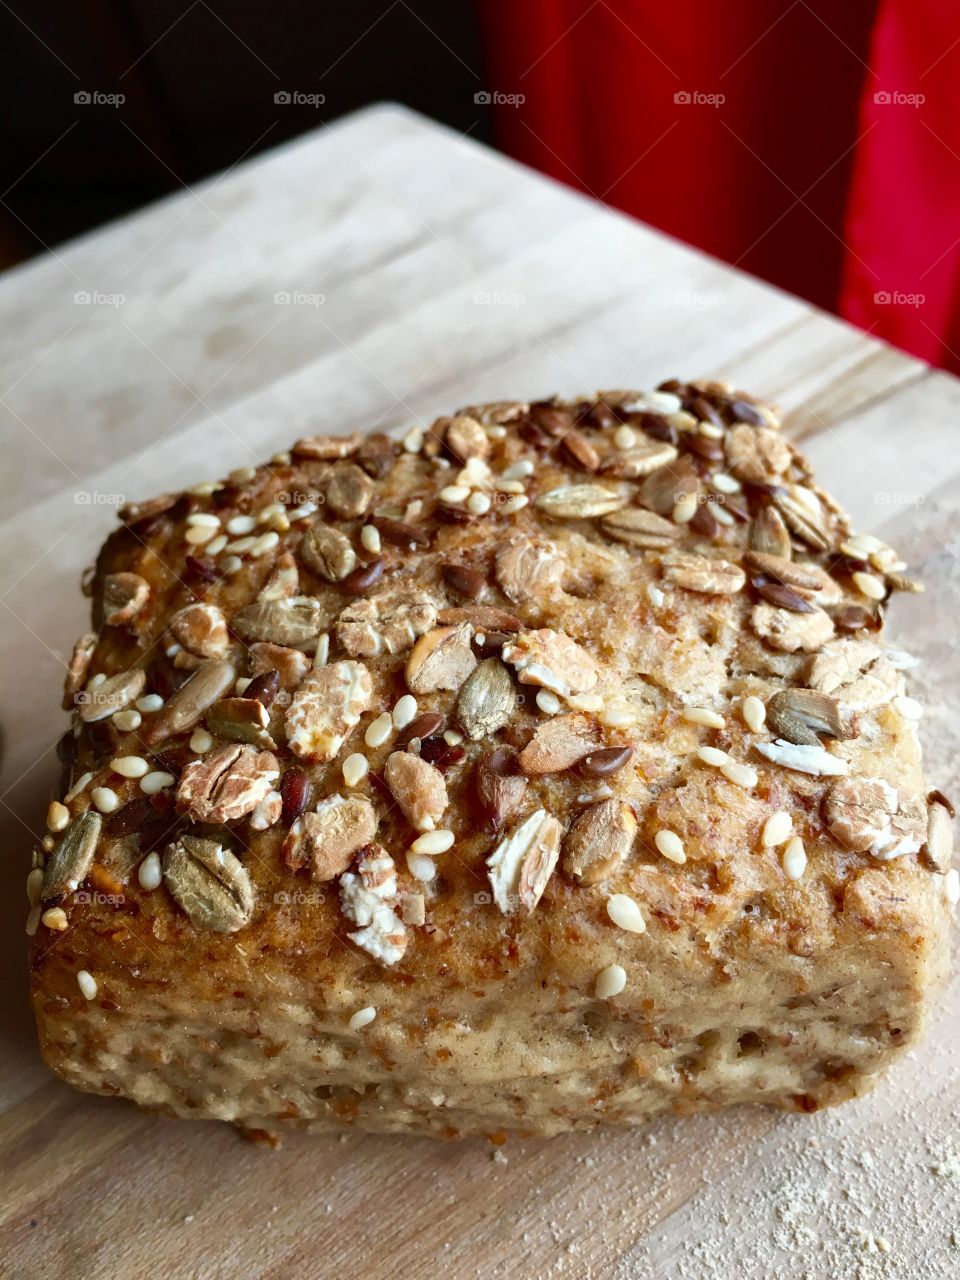 A fresh graham loaf with oatflakes and linseed.